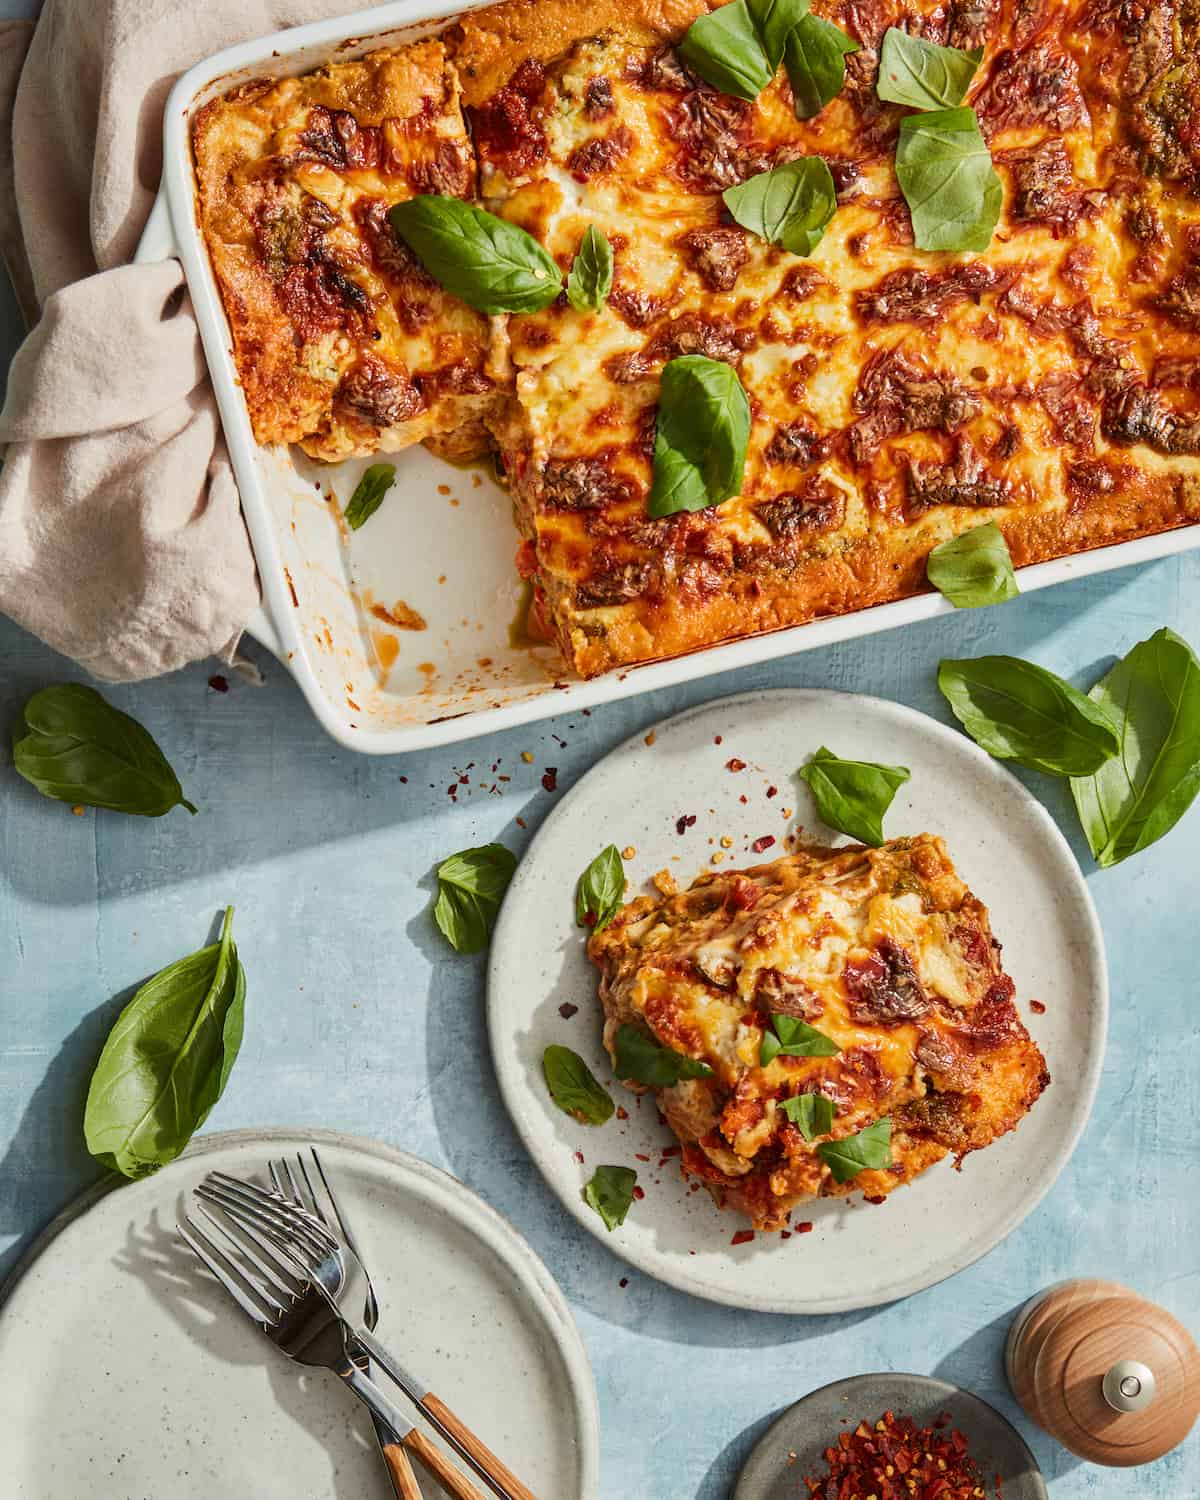 A white rectangular baking dish with lasagna garnished with basil leaves, and a corner piece cut out and served in a small ceramic plate on the side.